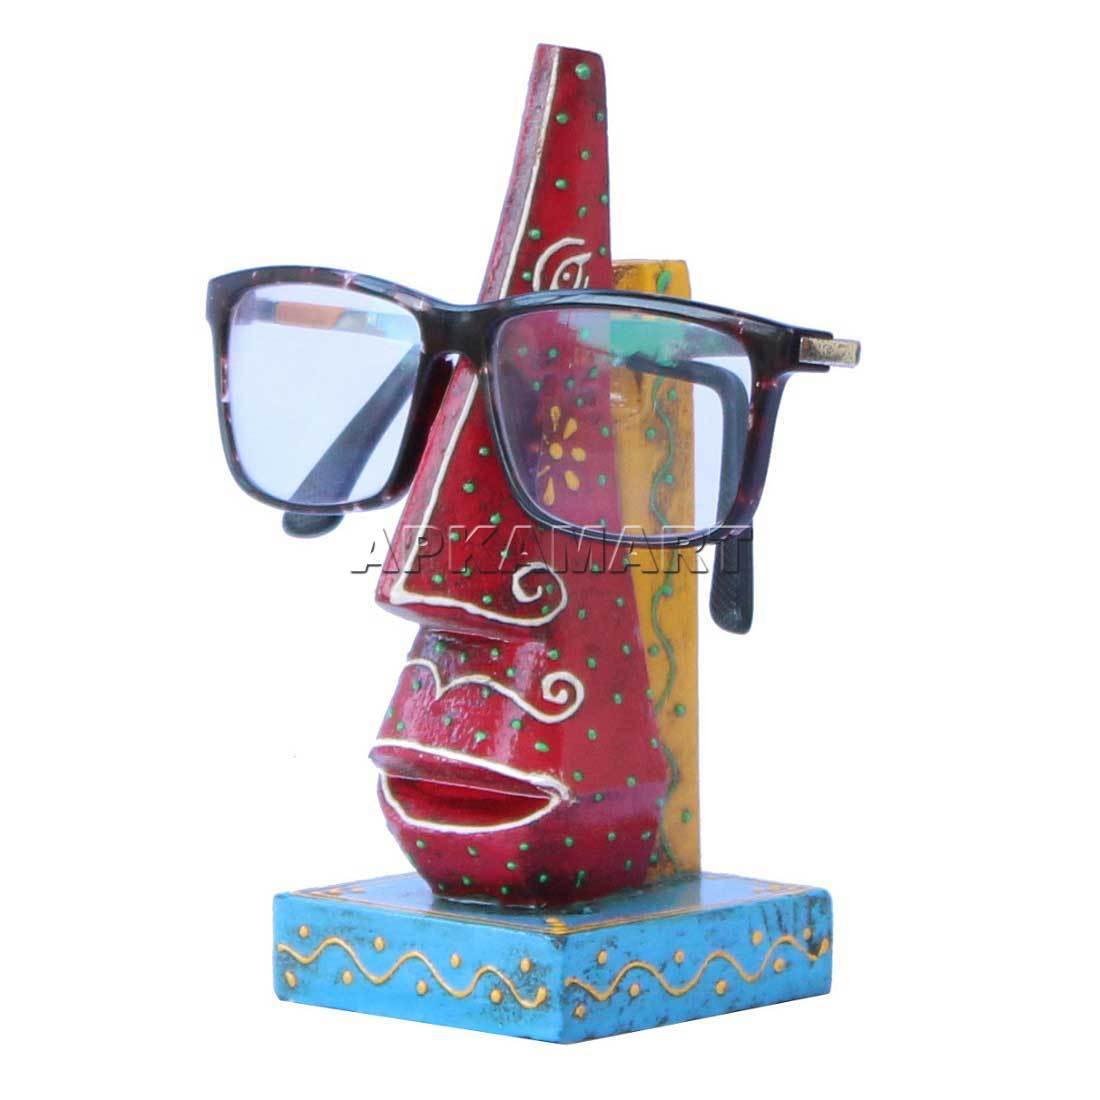 Spectacles Holder Stand | Wooden Spectacle Holder - 6 Inch - ApkaMart